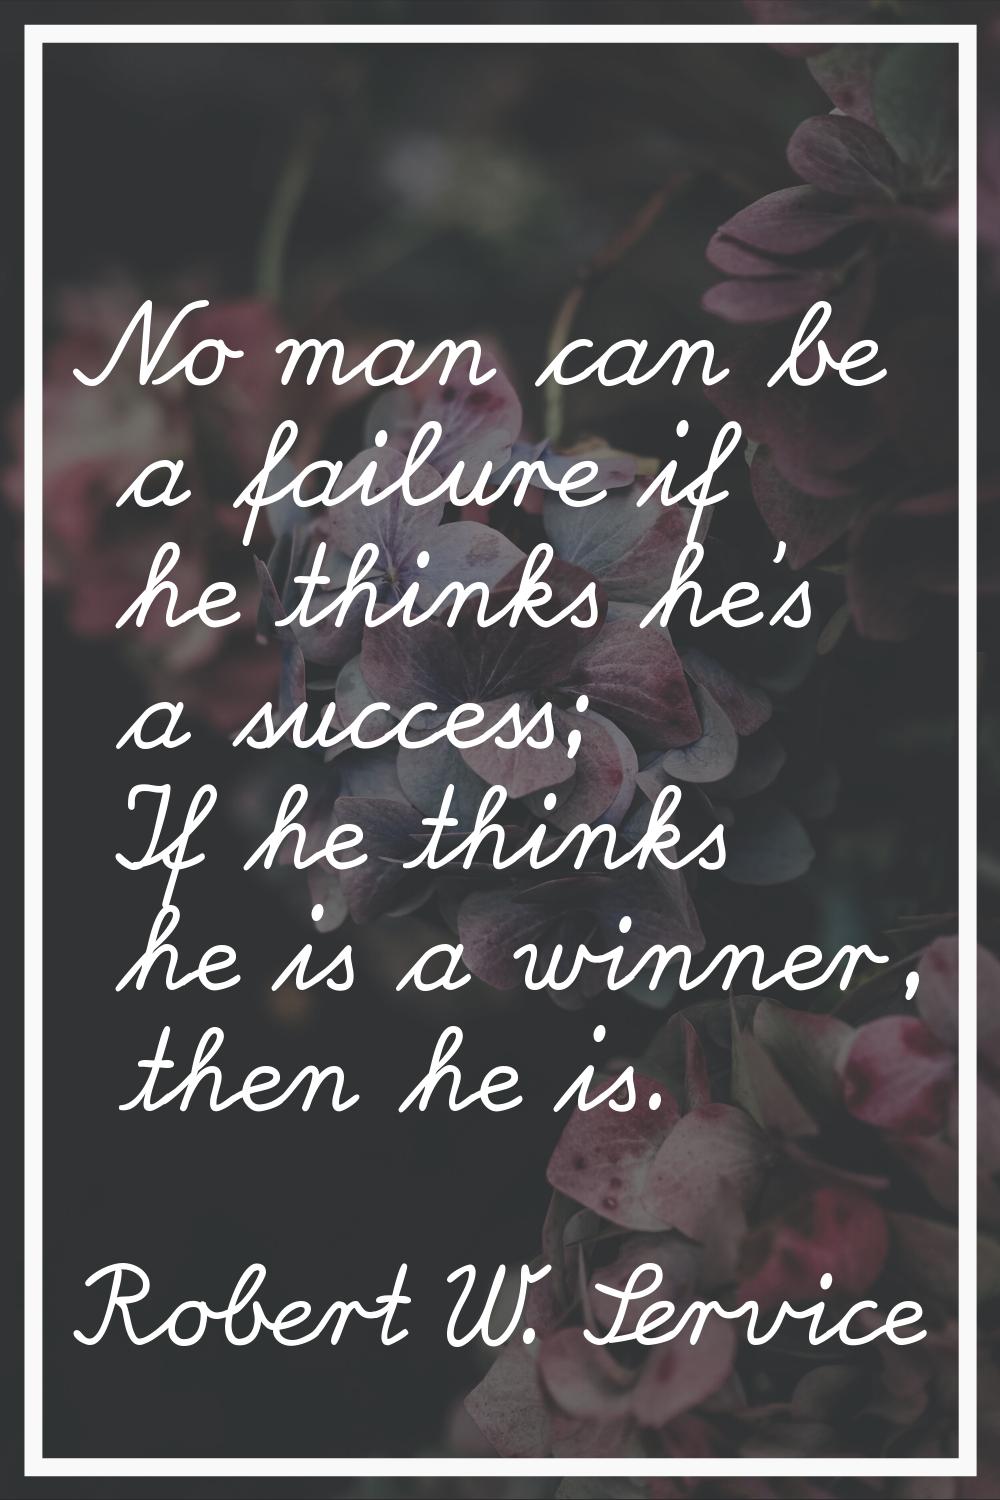 No man can be a failure if he thinks he's a success; If he thinks he is a winner, then he is.